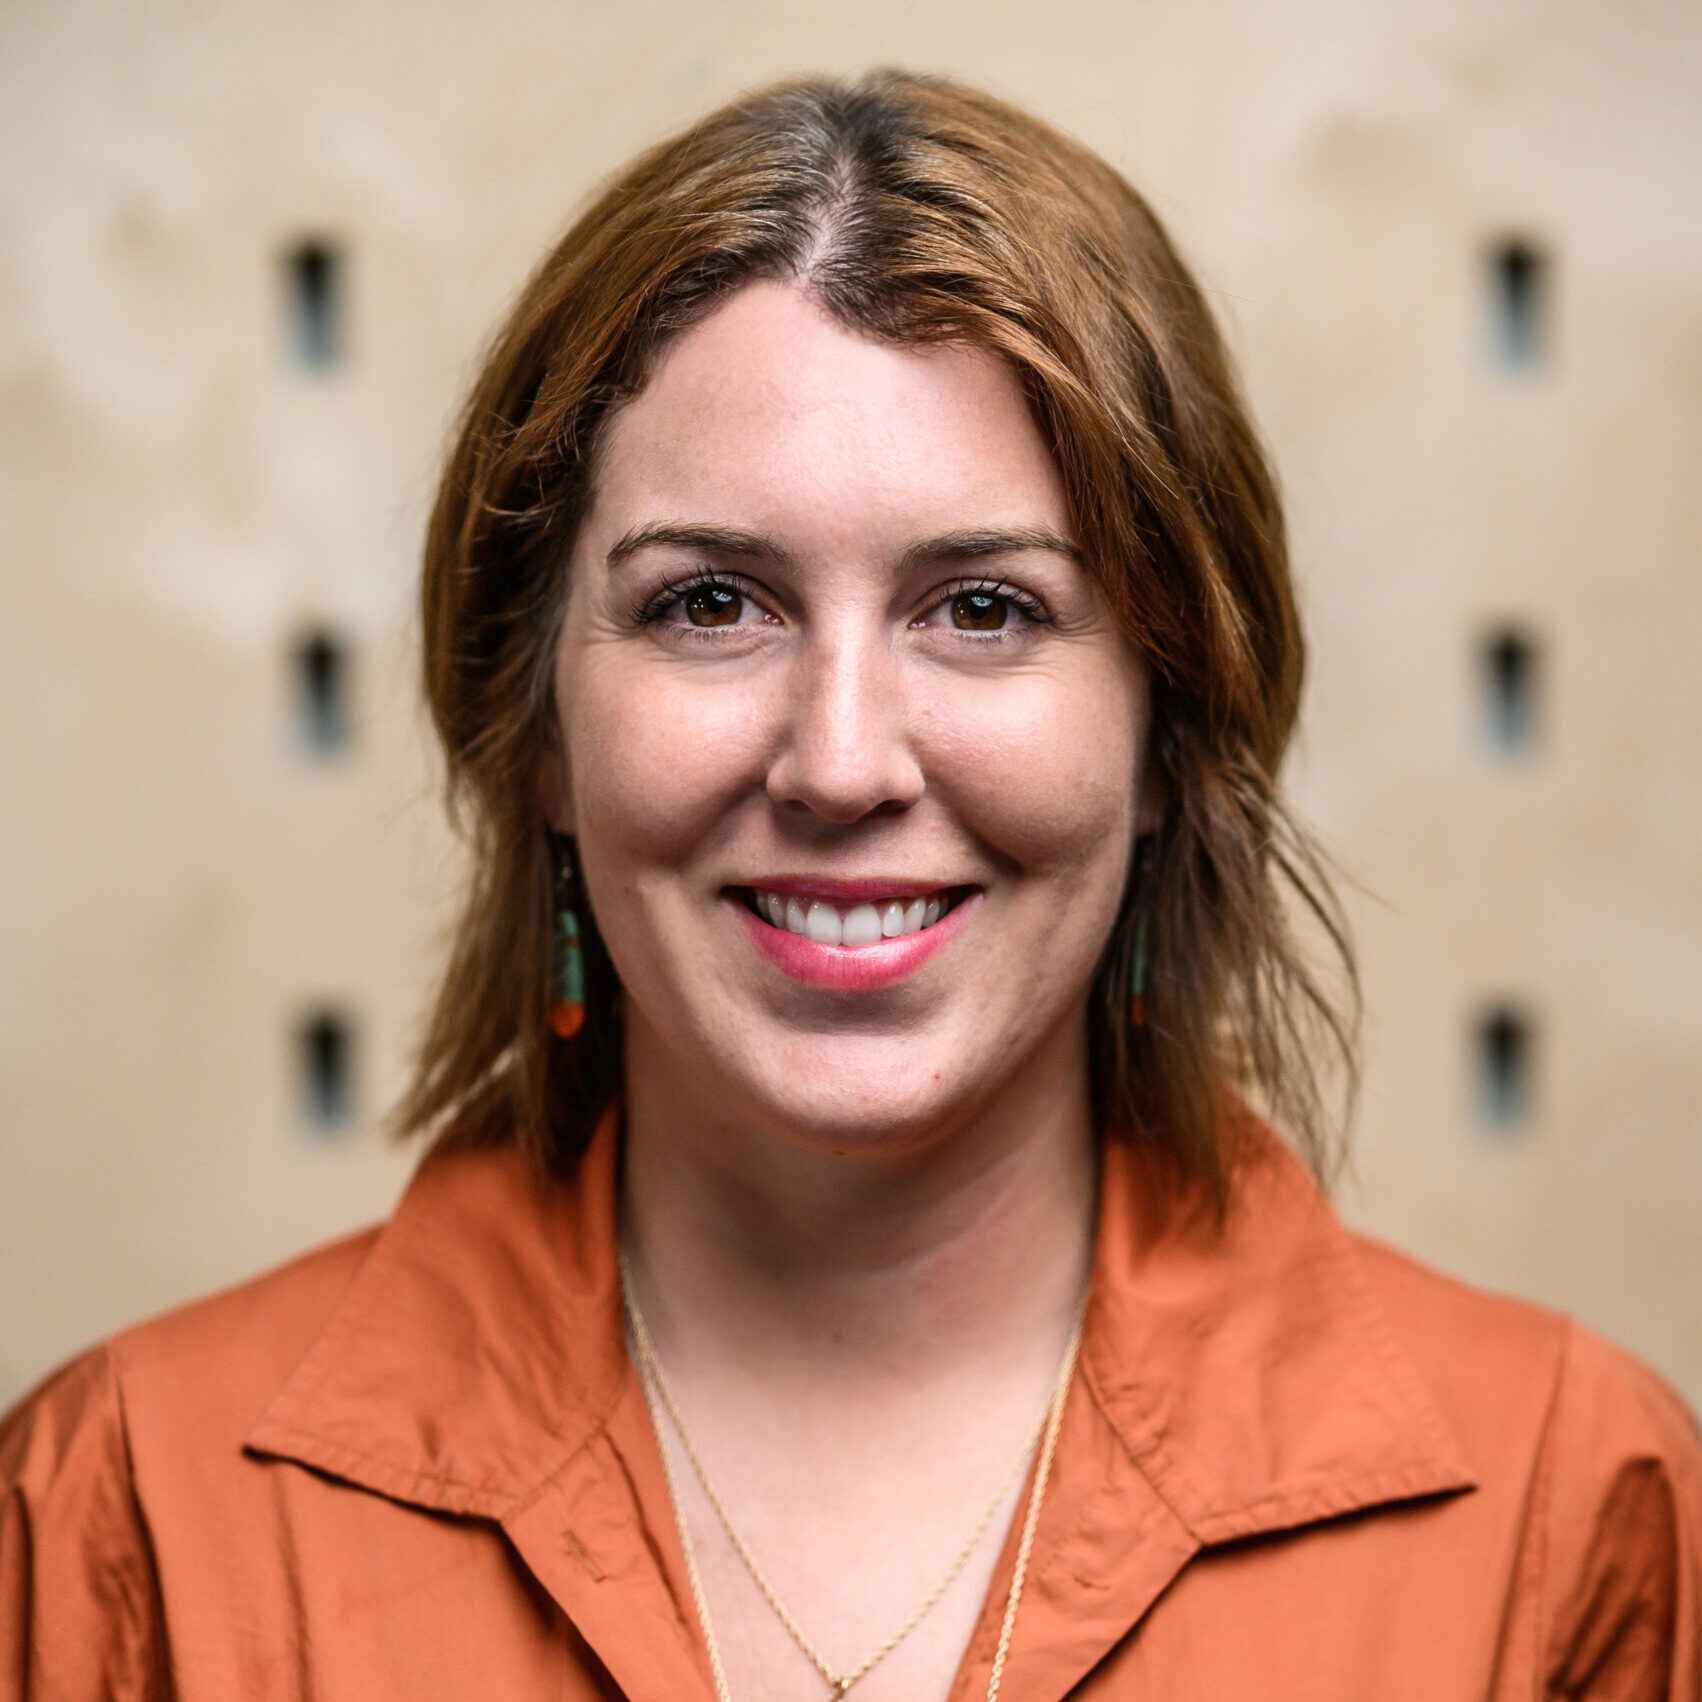 Image of Kristin Leiber. Photo is a headshot of a women with brown hair and orange shirt, looking directly at the camera smiling.